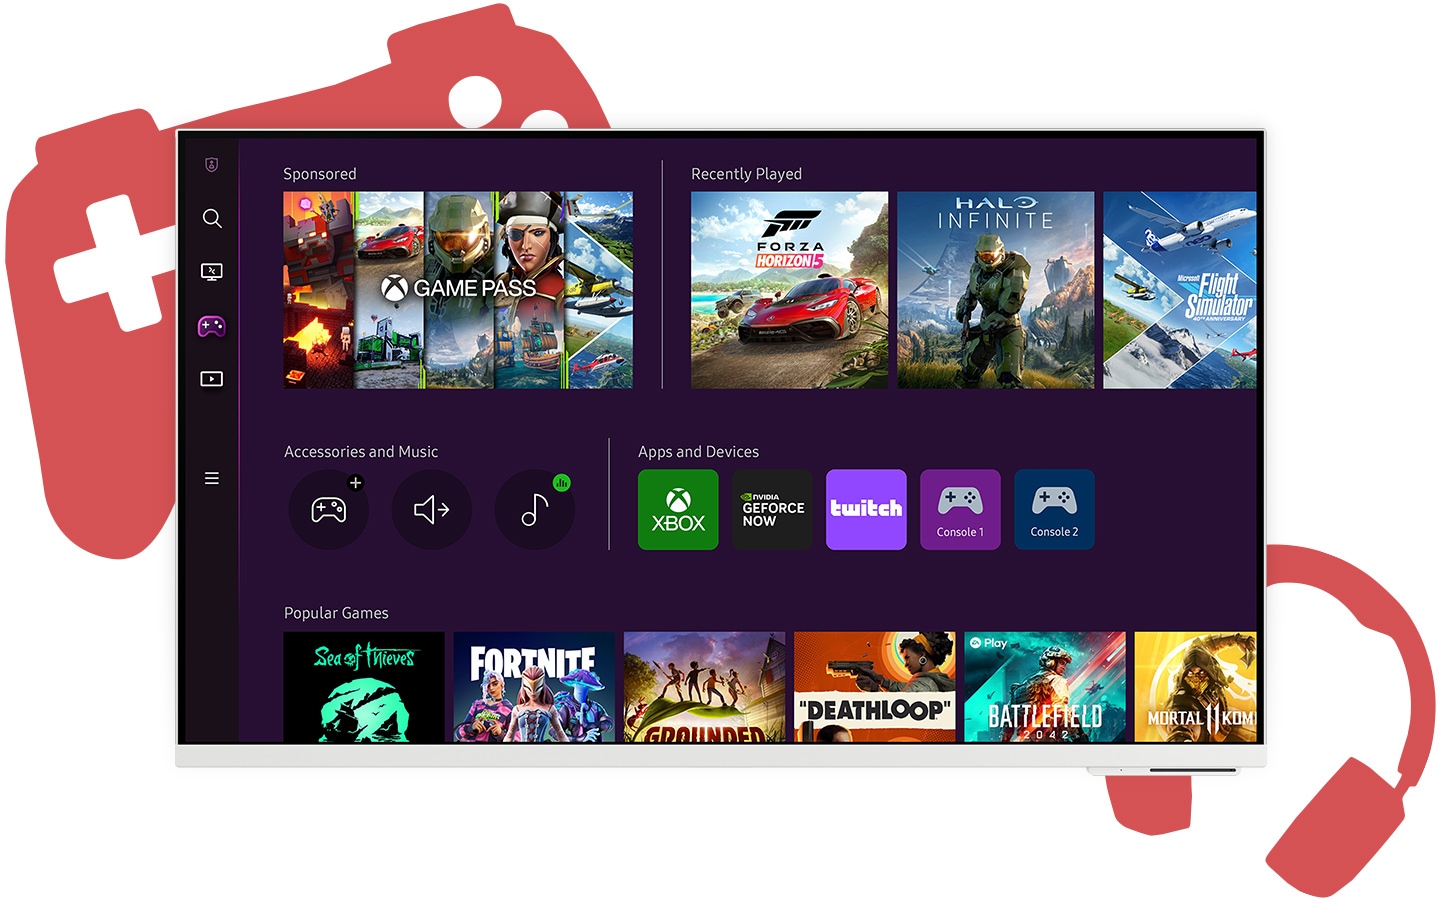 A monitor screen shows gaming hub starting screen with multiple games and apps available to download.